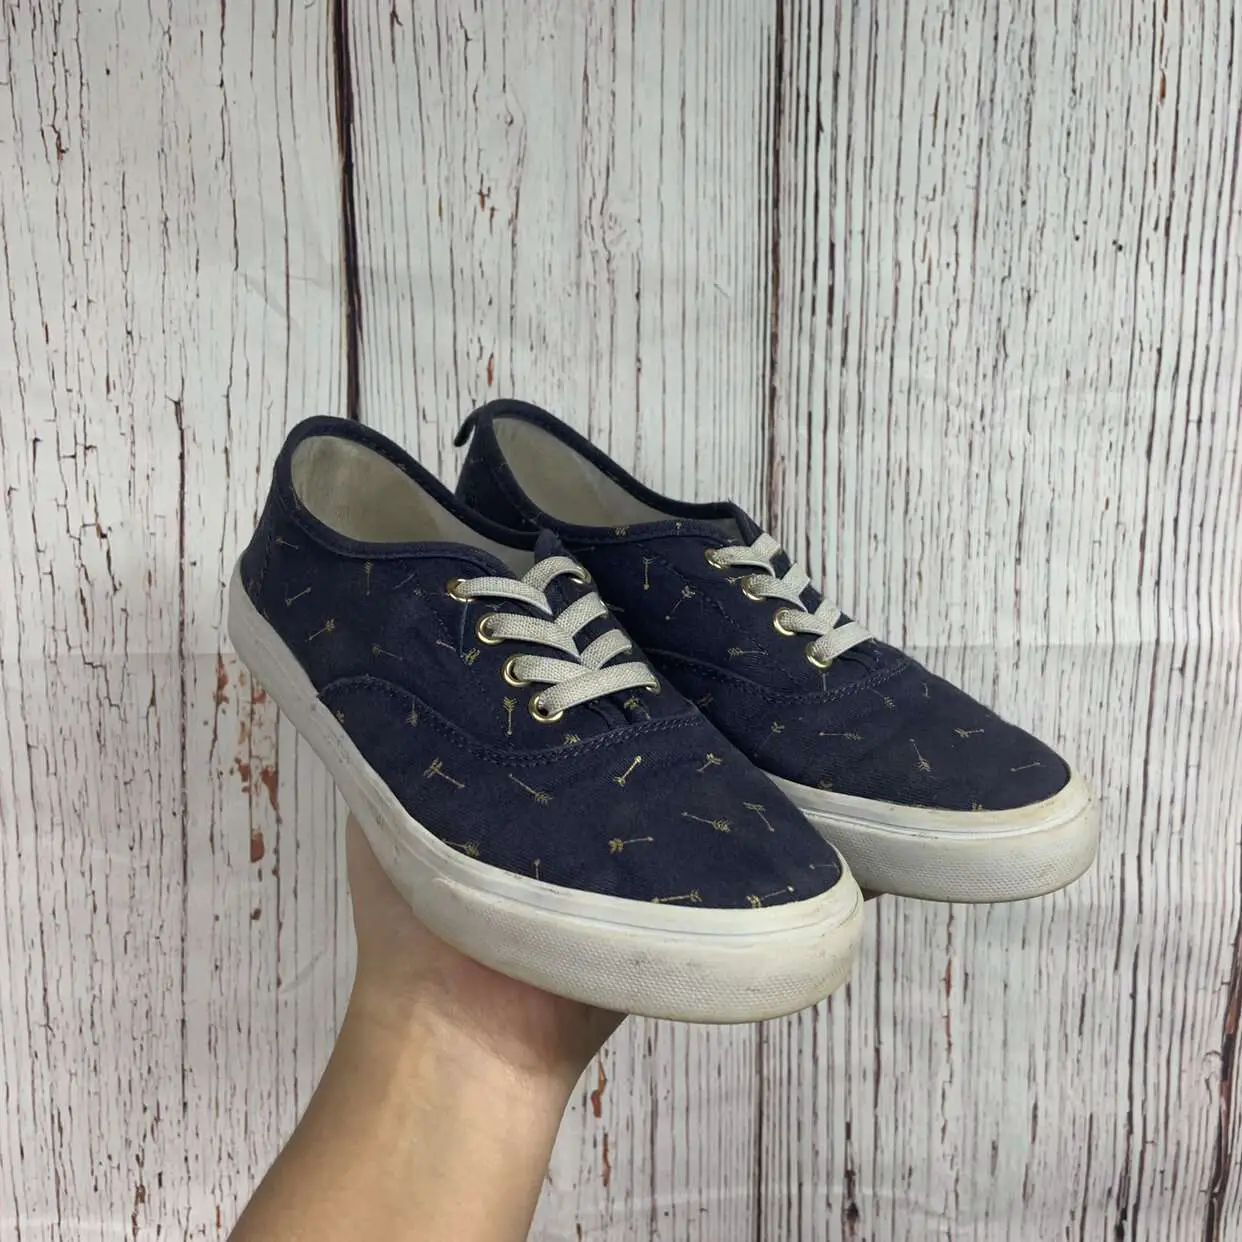 Old Navy Shoes Girls Vans Type Size 3